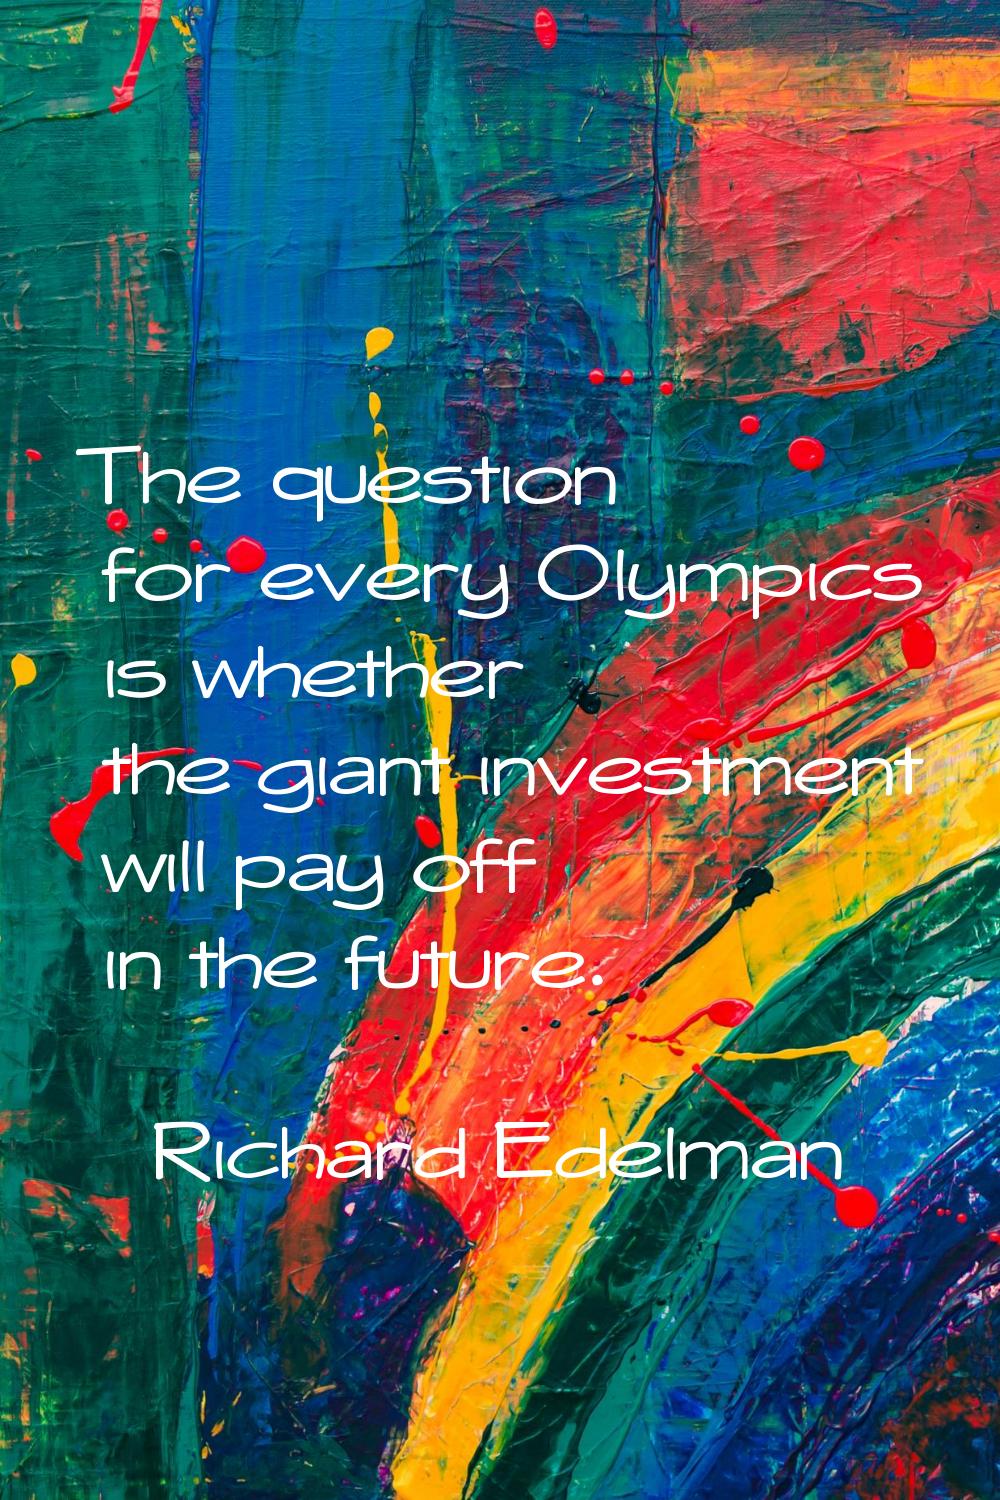 The question for every Olympics is whether the giant investment will pay off in the future.